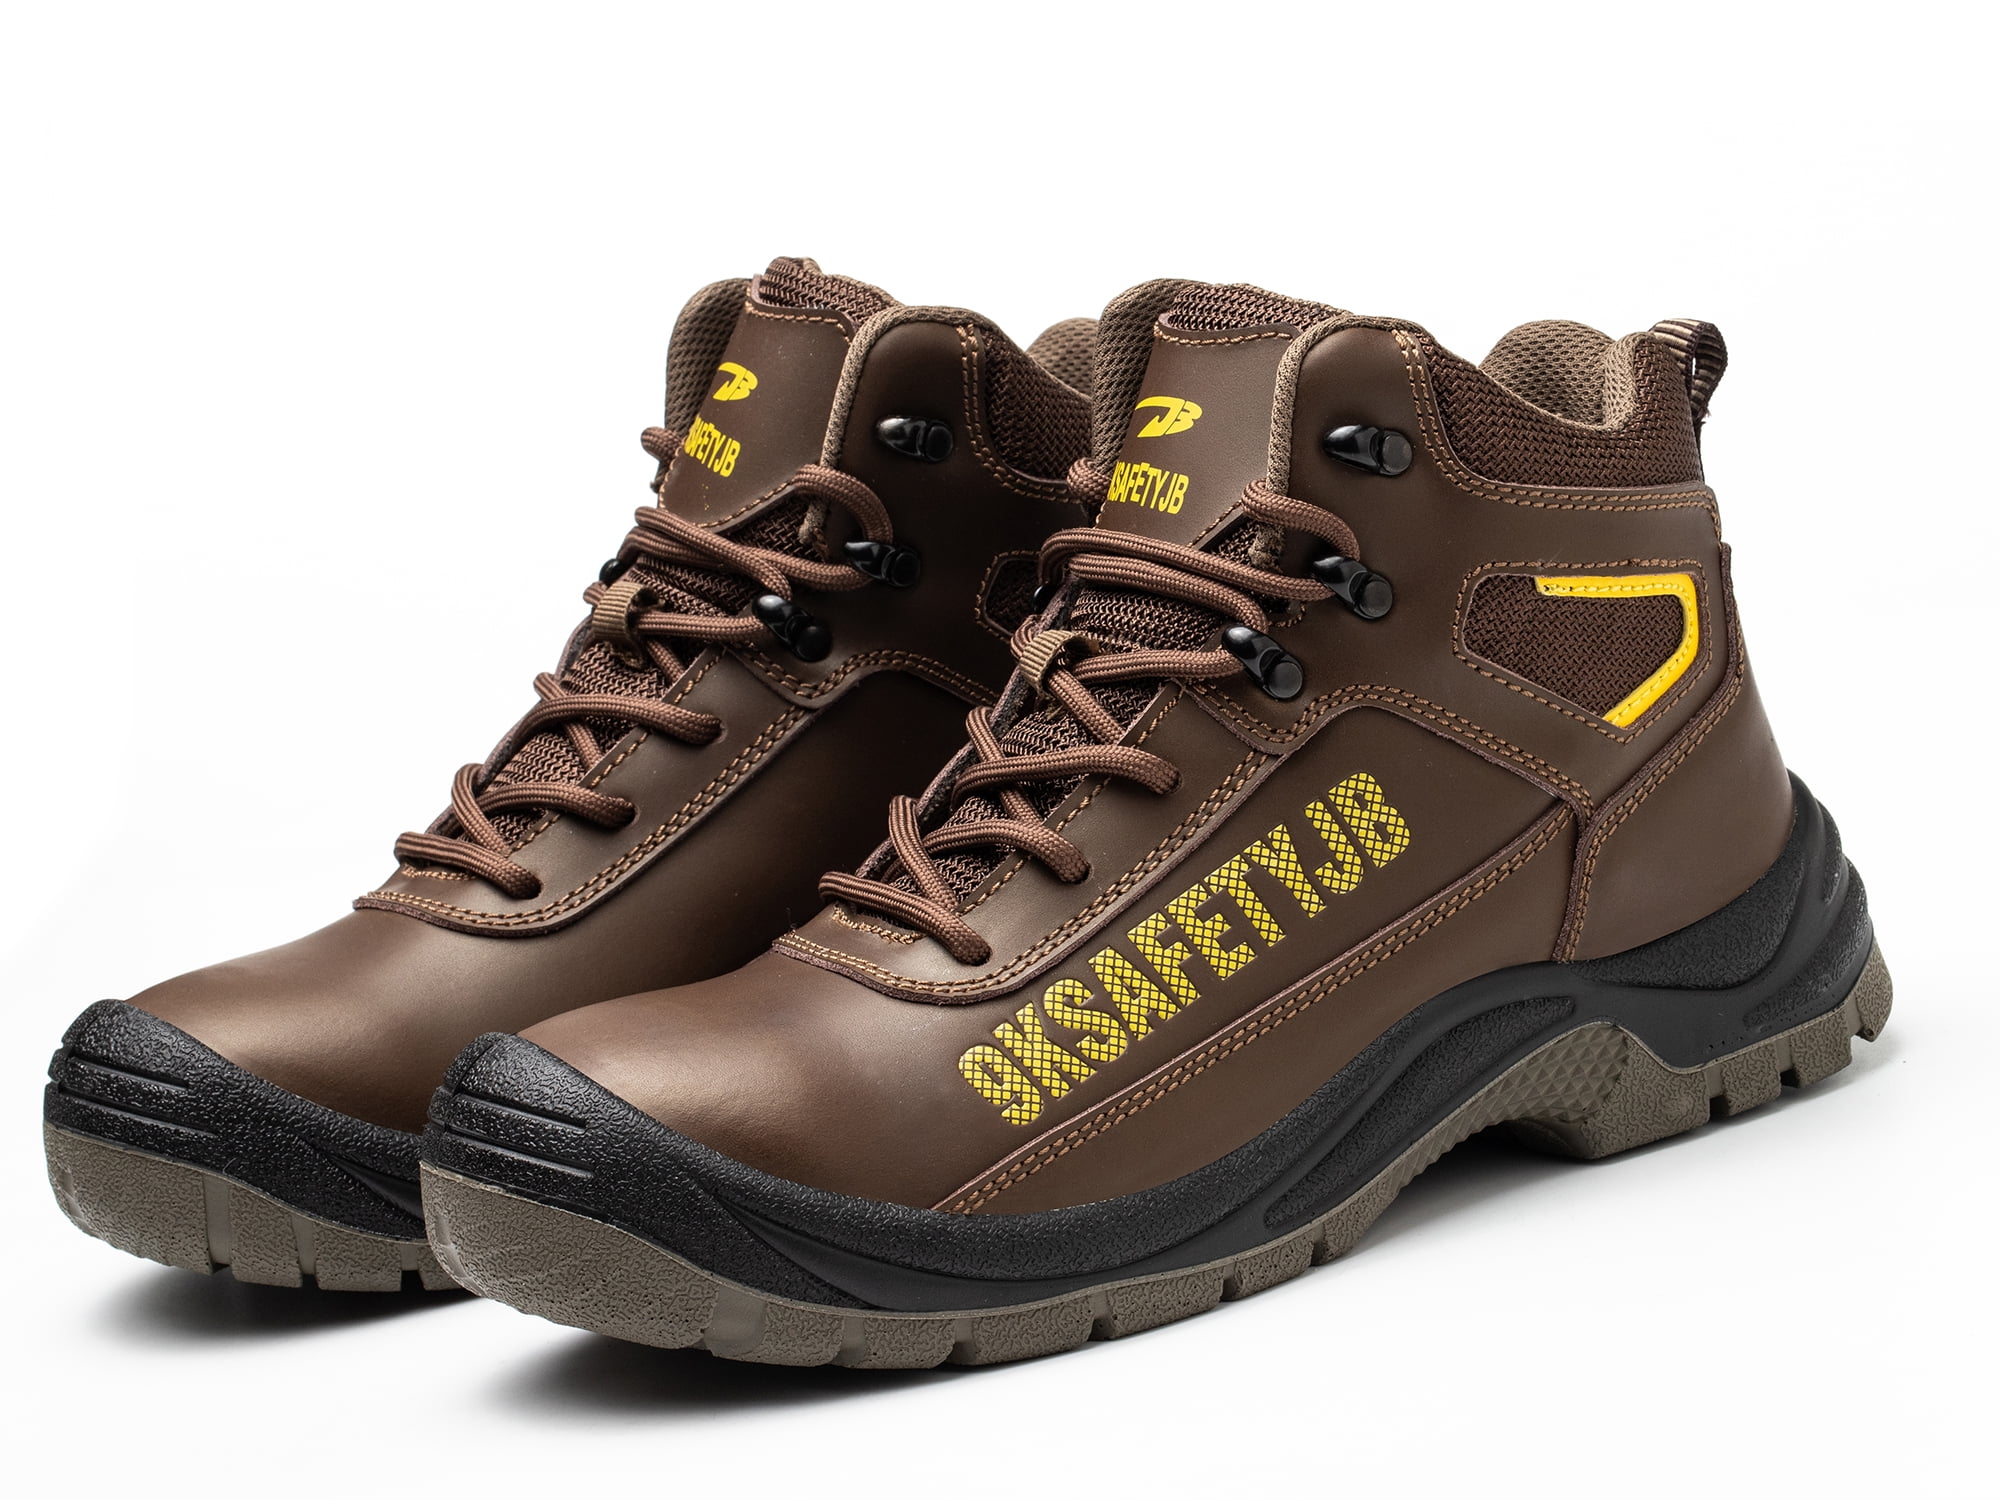 Mens Indestructible Safety Shoes Steel Toe Cap Work Boots Sport Hiking Sneakers 